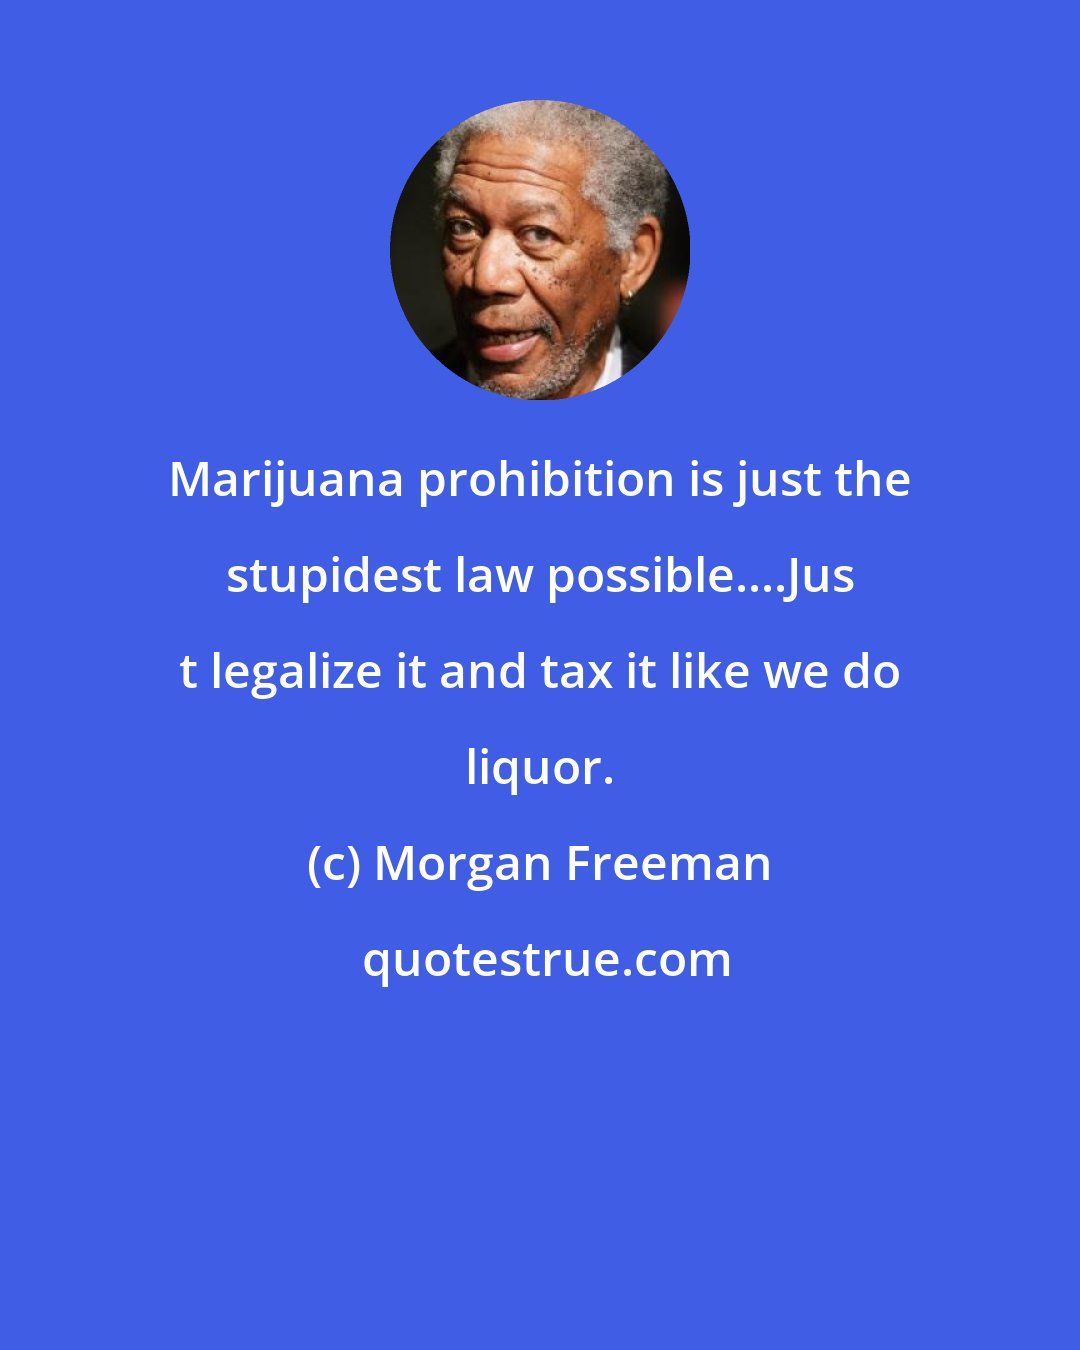 Morgan Freeman: Marijuana prohibition is just the stupidest law possible....Jus t legalize it and tax it like we do liquor.